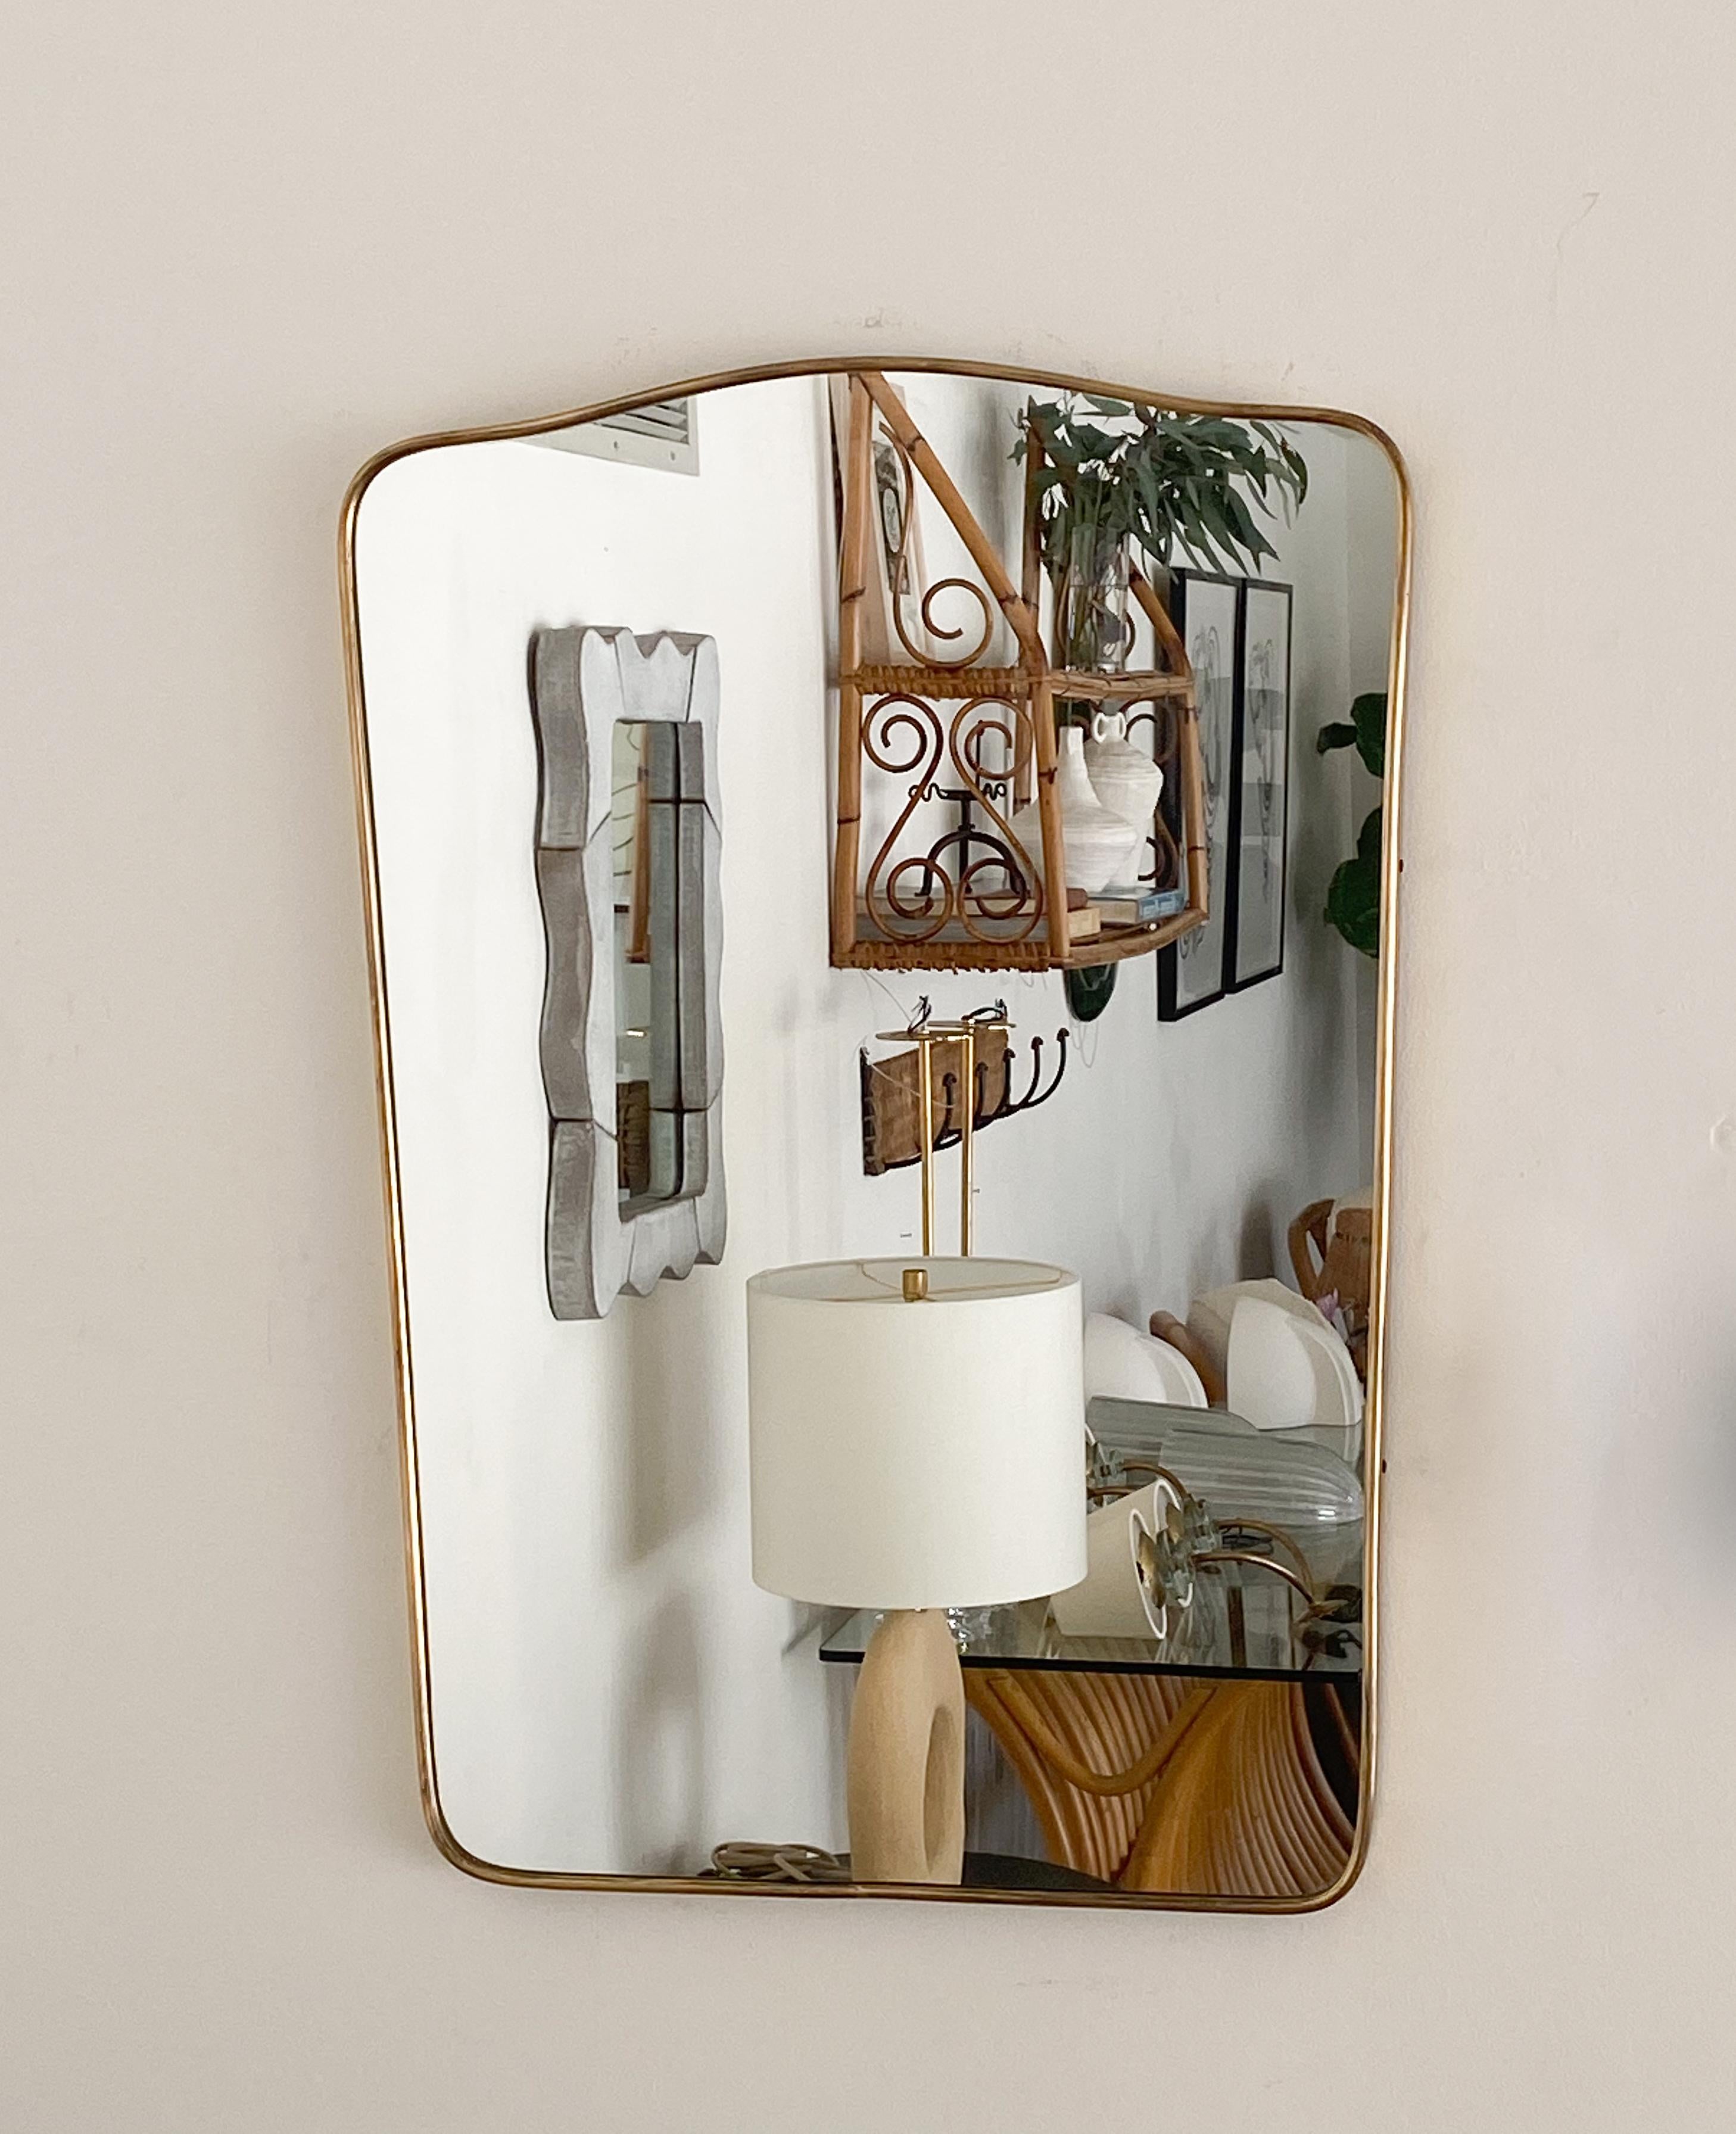 Vintage Italian mirror with brass frame in shield shape. Original brass finish with nice age and patina.